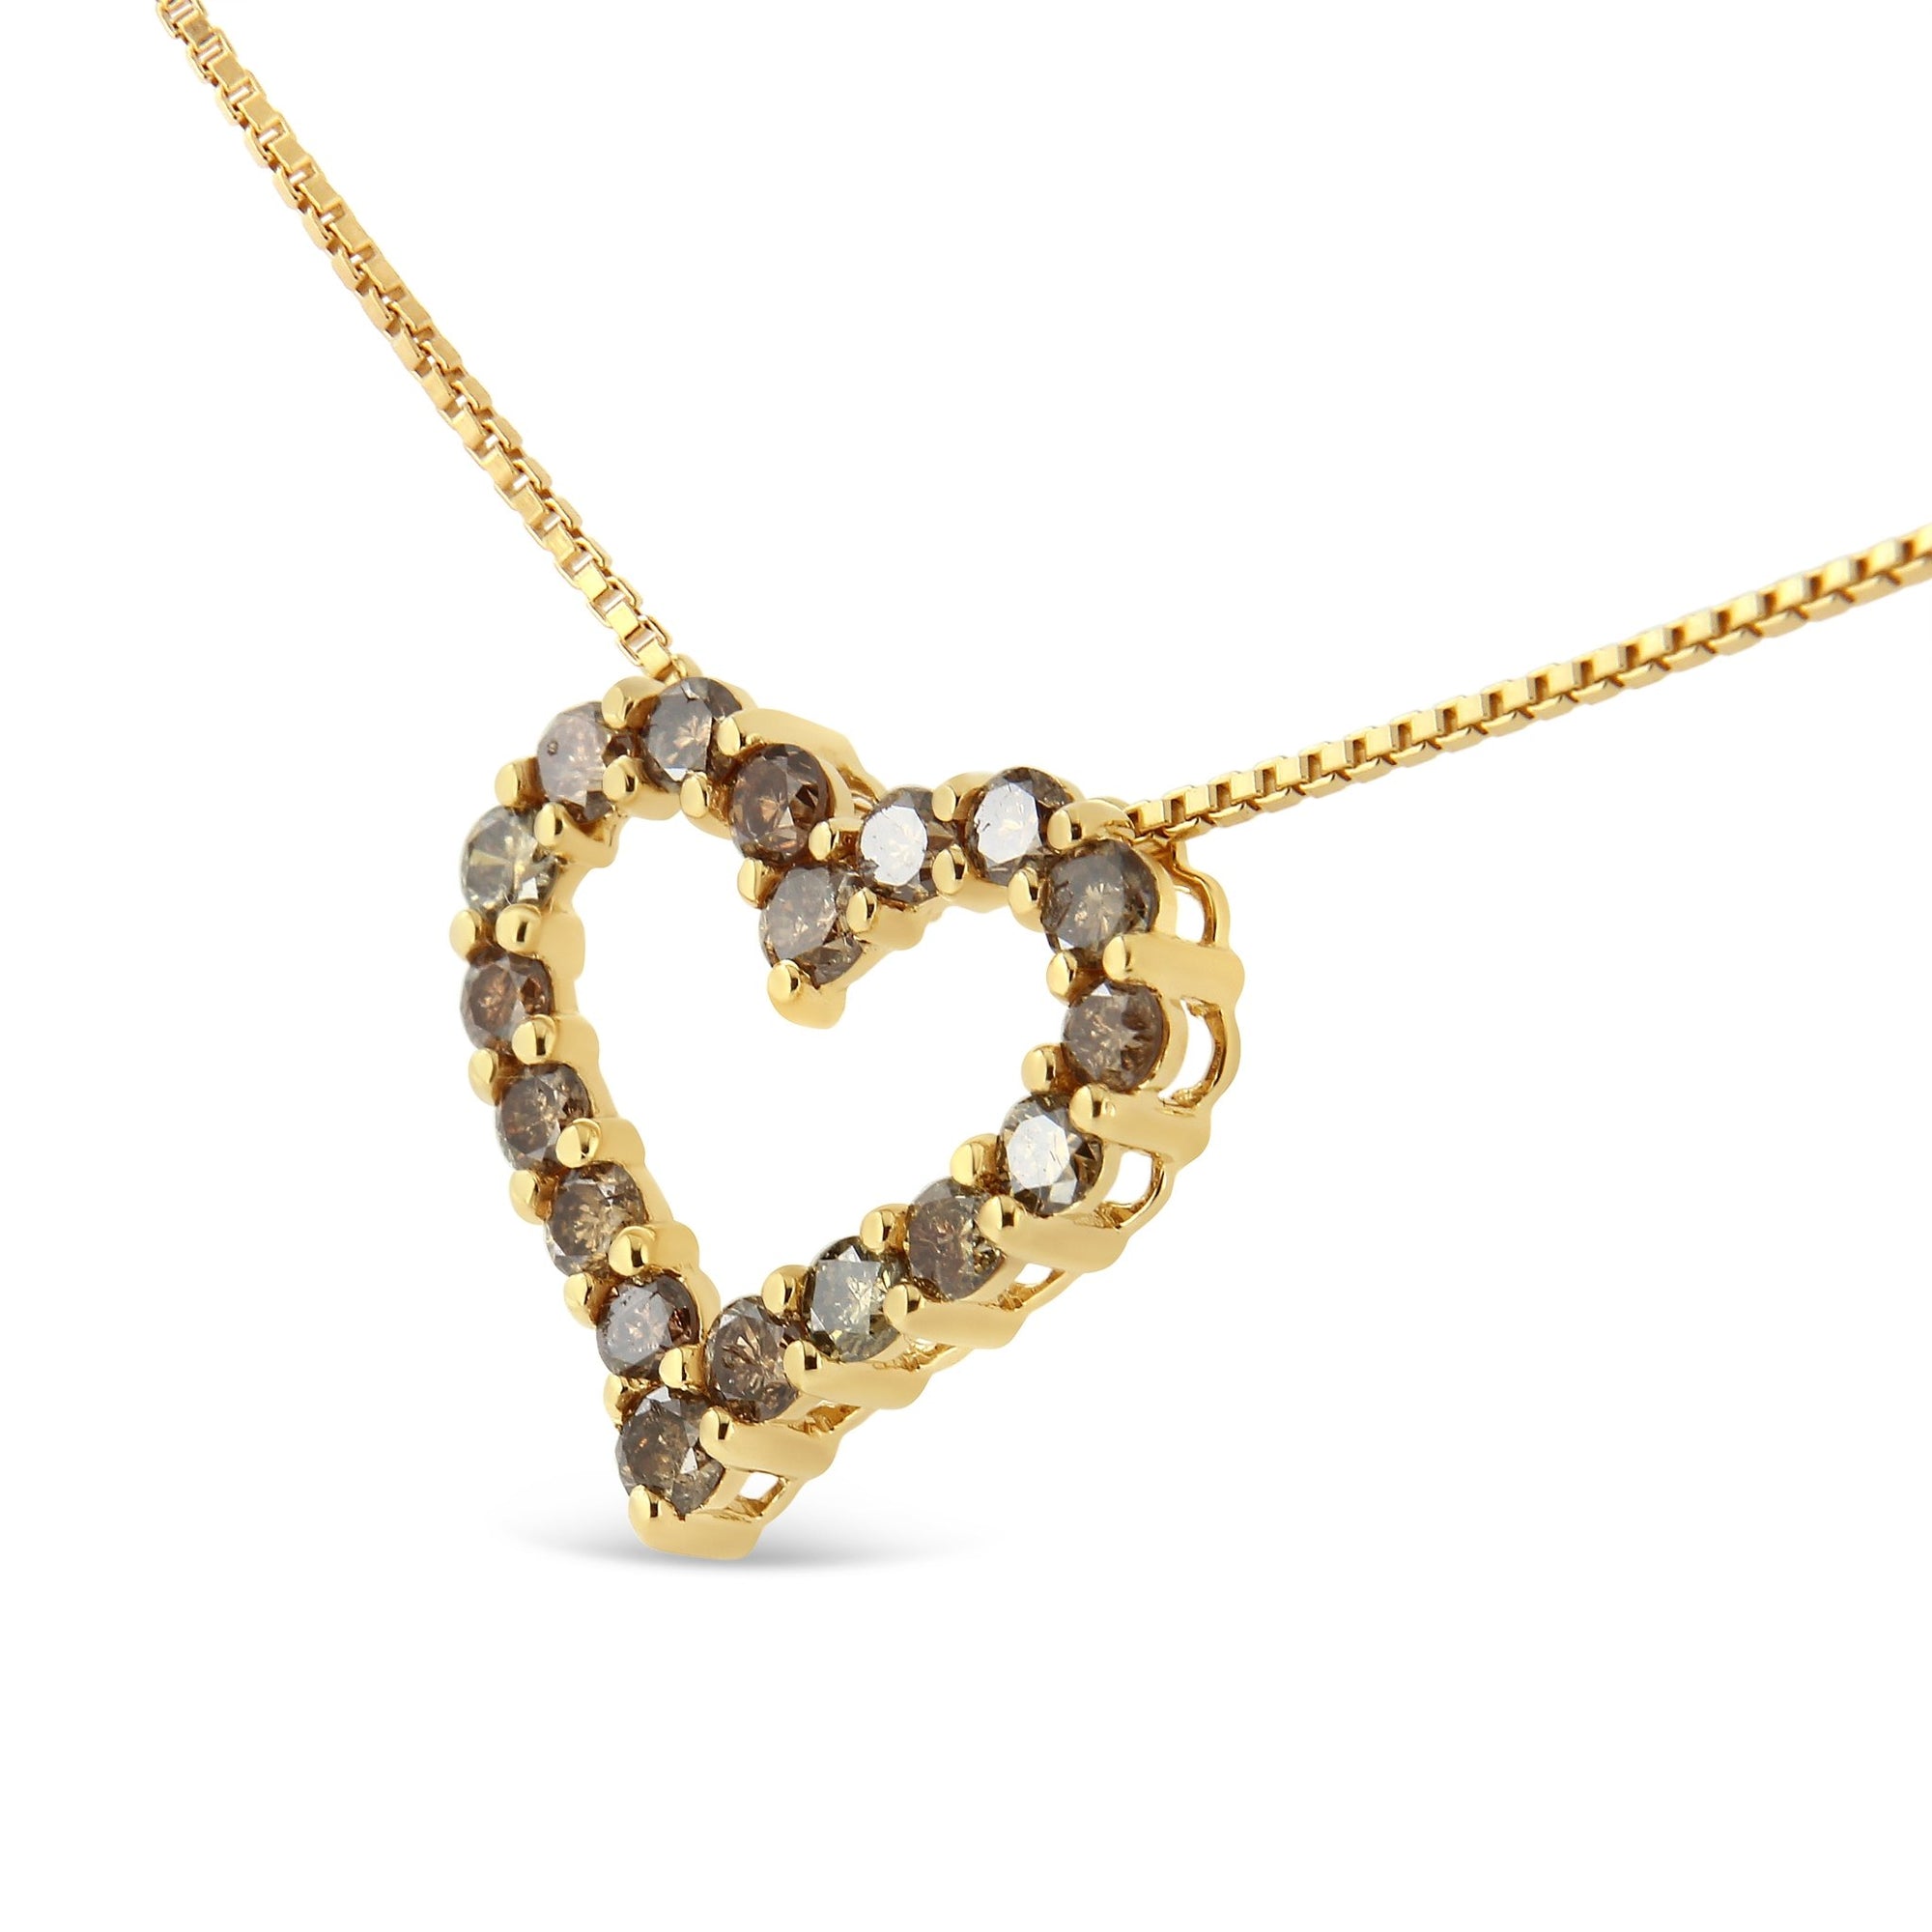 14K Yellow Gold Plated .925 Sterling Silver 1.0 Cttw Champagne Diamond Heart Pendant Necklace (K-L Color, I1-I2 Clarity) - 18" - LinkagejewelrydesignLinkagejewelrydesign